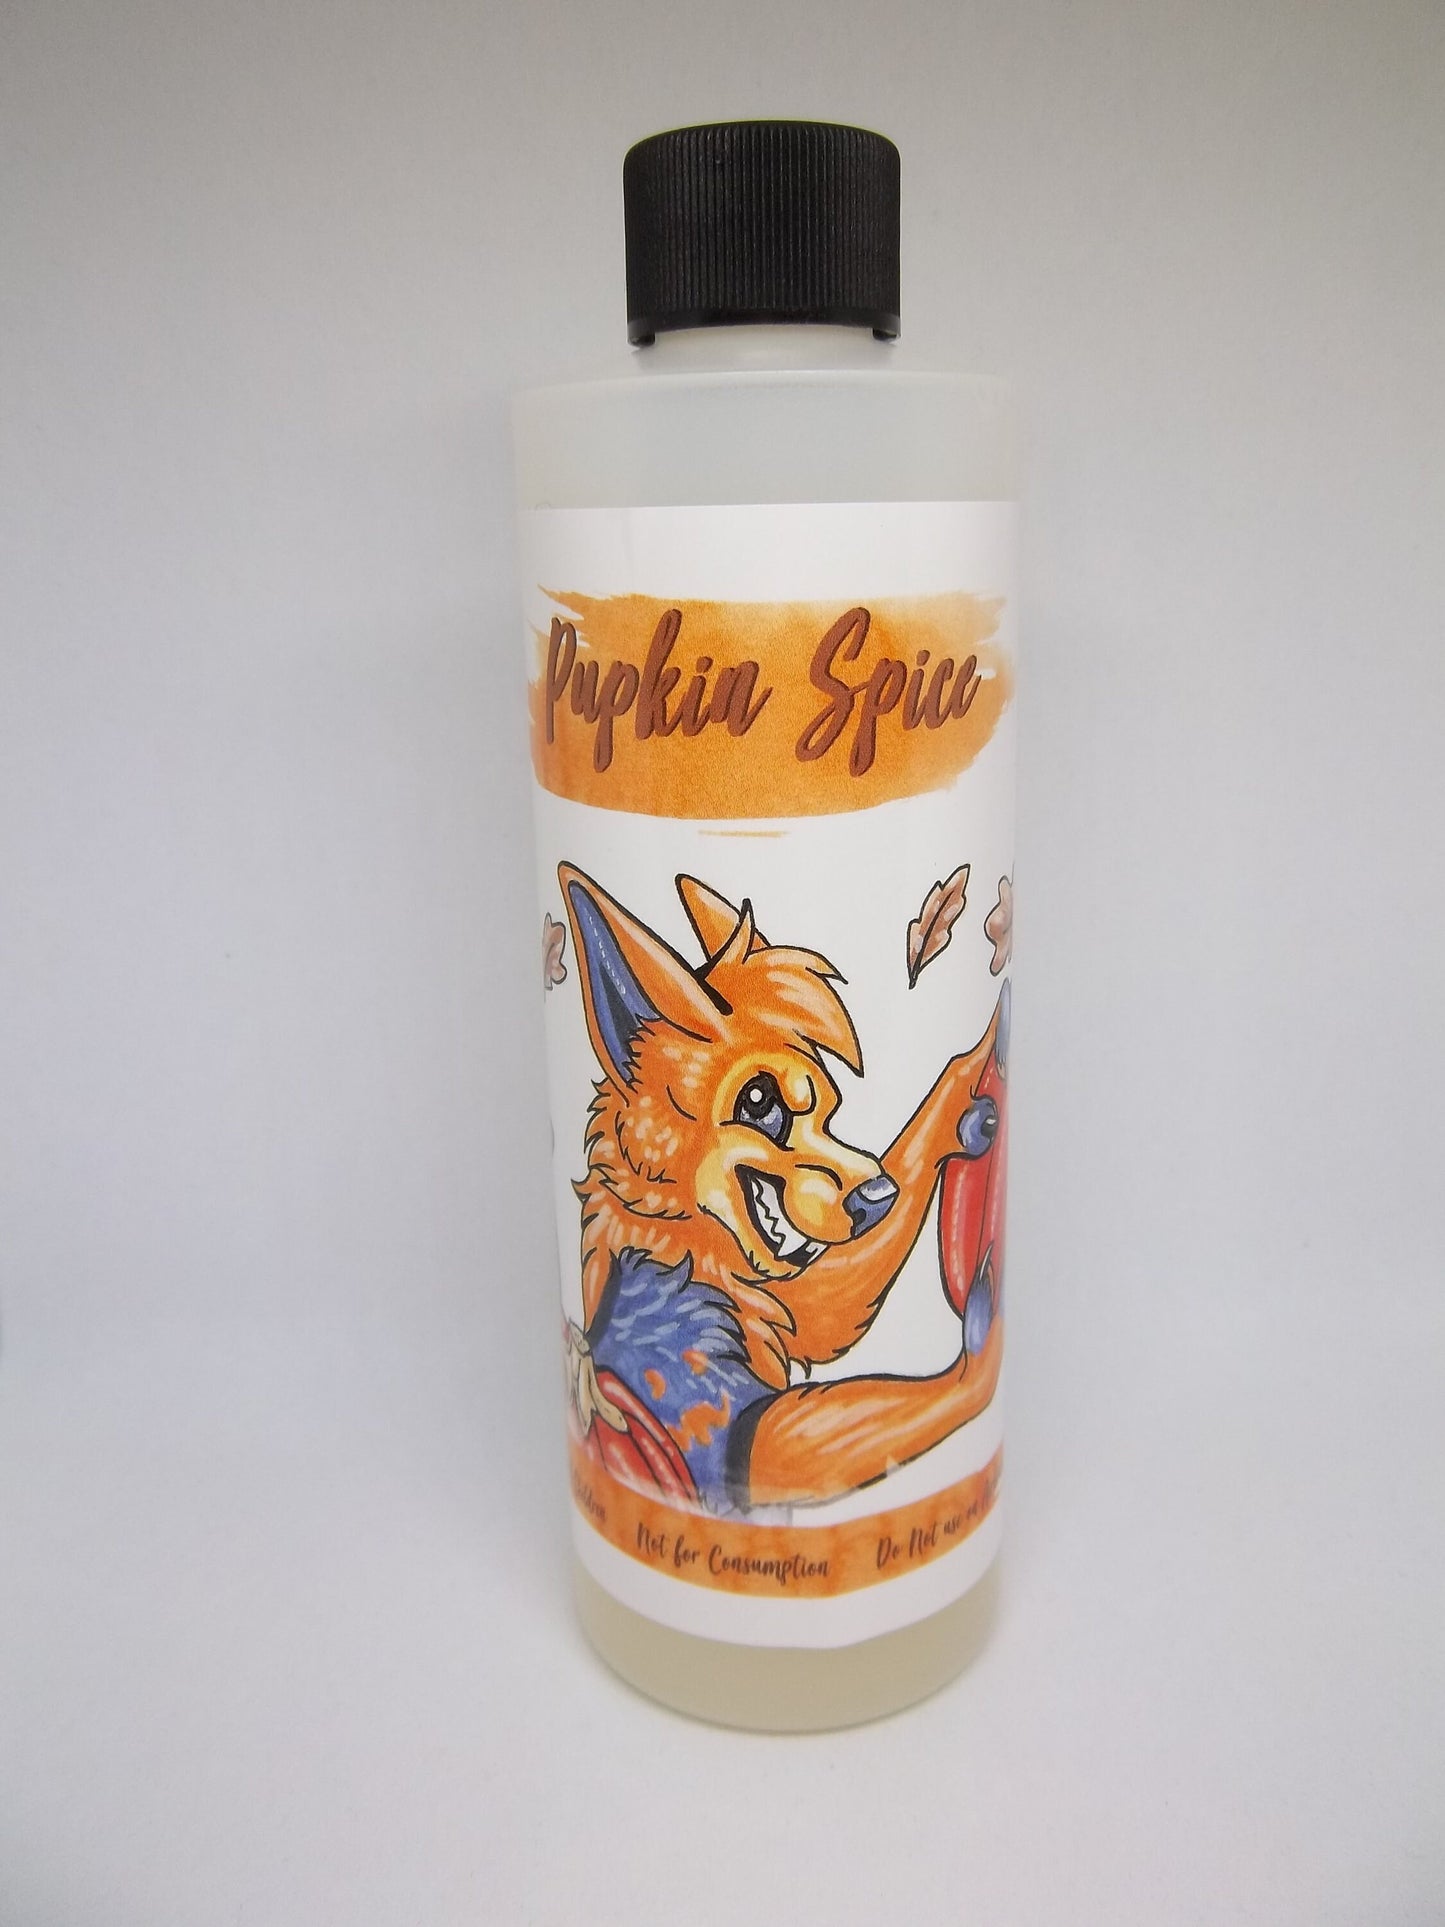 Fursuit Spray Pumpkin Spice Pupkin Spice Bottle Fragrance and Cleaner 8oz Essential Cleaning Costume Cleaner US Buyers Only